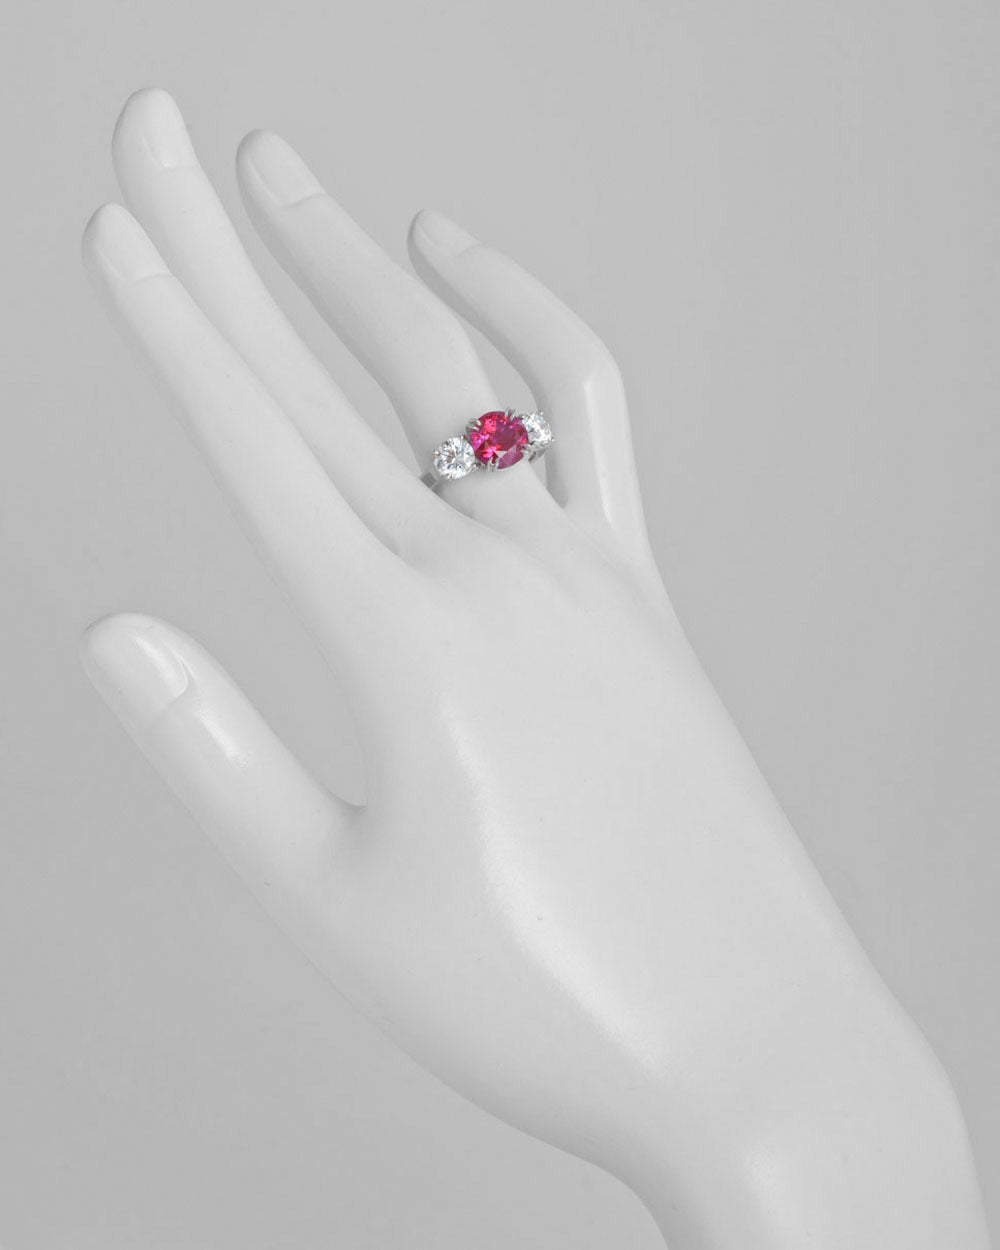 Ruby and diamond three-stone ring, centering on a round brilliant cut natural, Burmese ruby weighing 3.02 carats, with two round brilliant cut diamond shoulders weighing 1.40 total carats (both 0.70 carat with E-color/VS2-clarity), mounted in